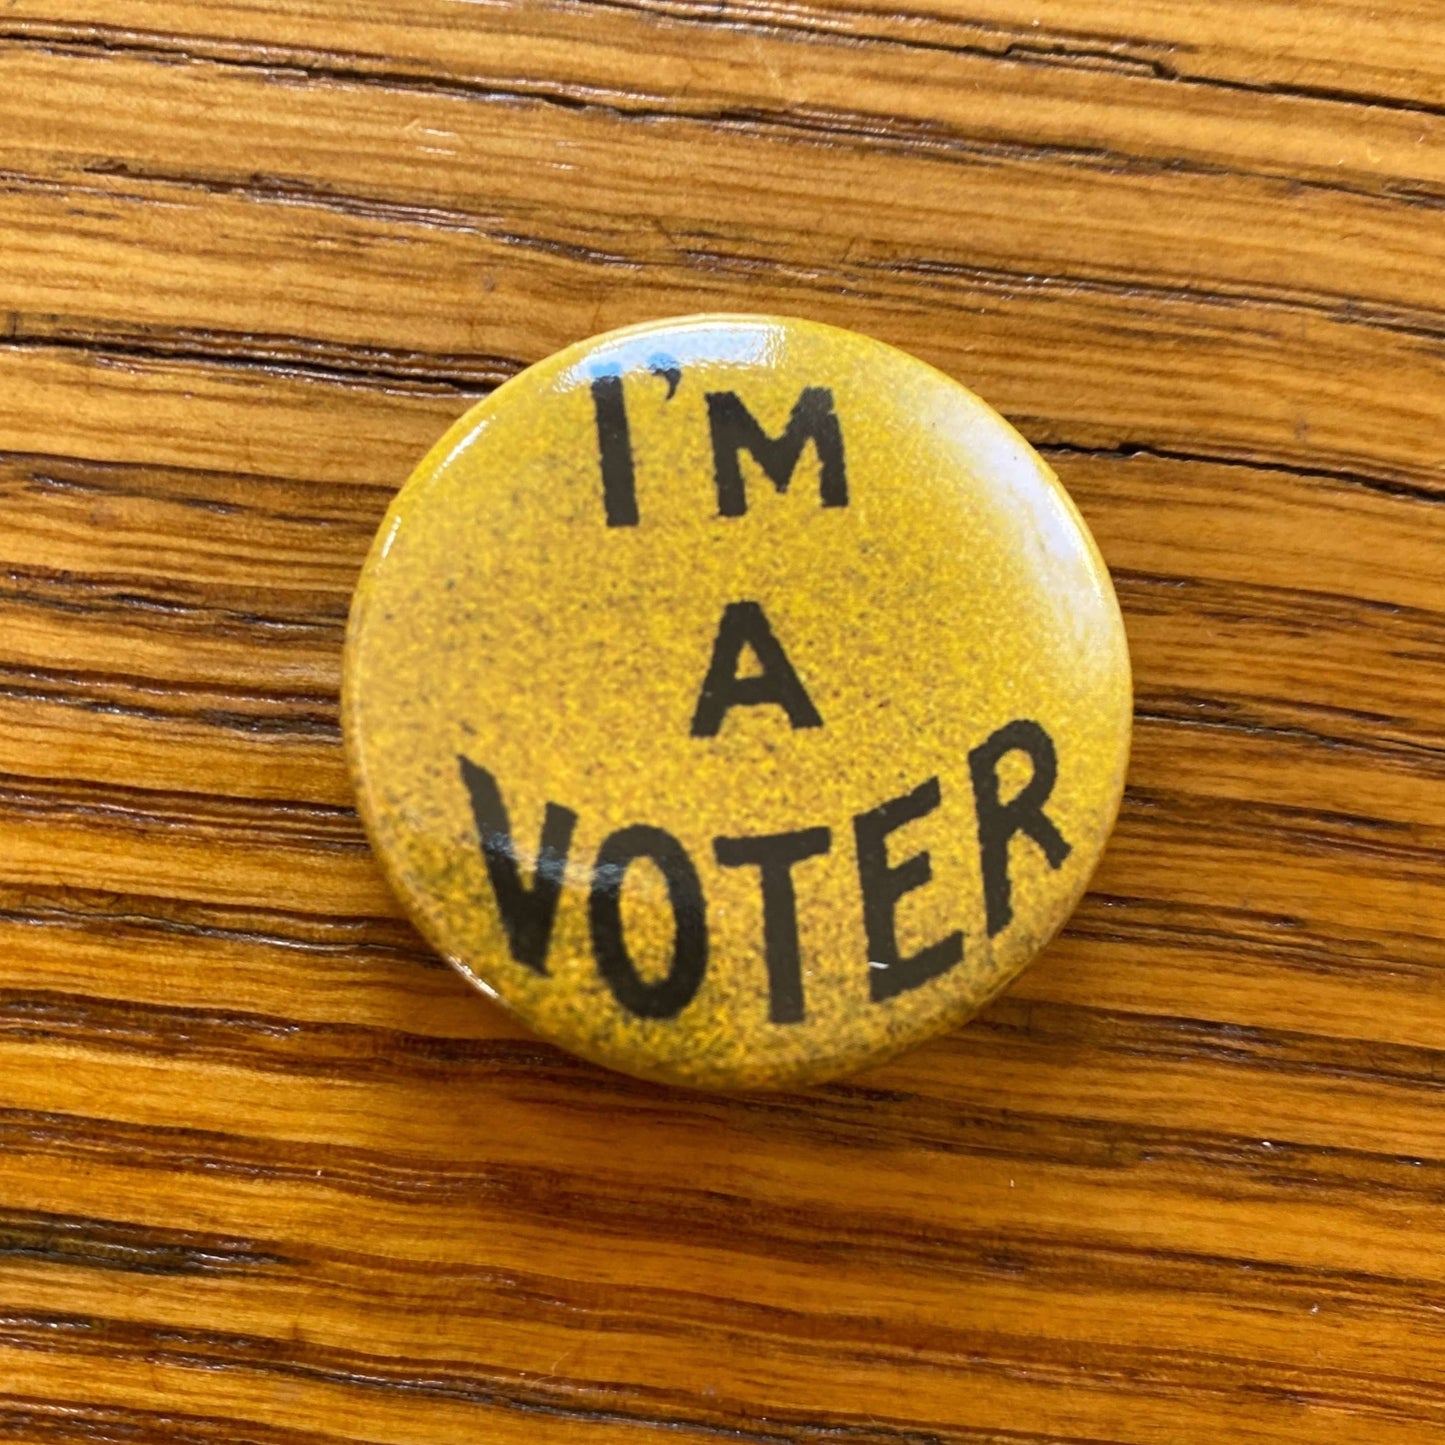 "I'm a Voter" Button pin from The History List store